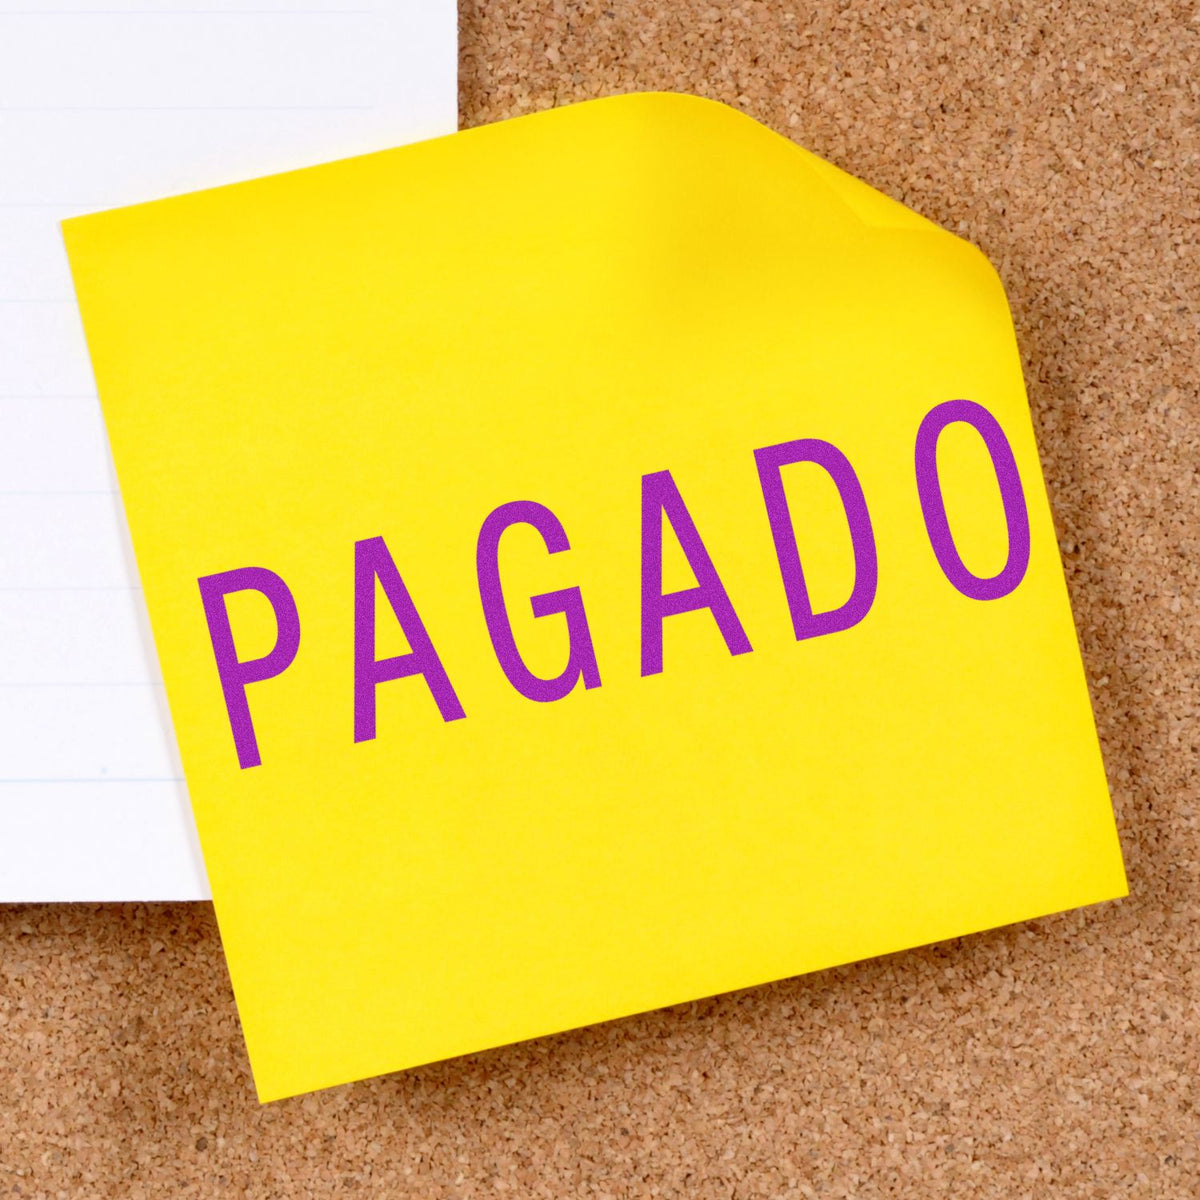 Large Pagado Rubber Stamp In Use